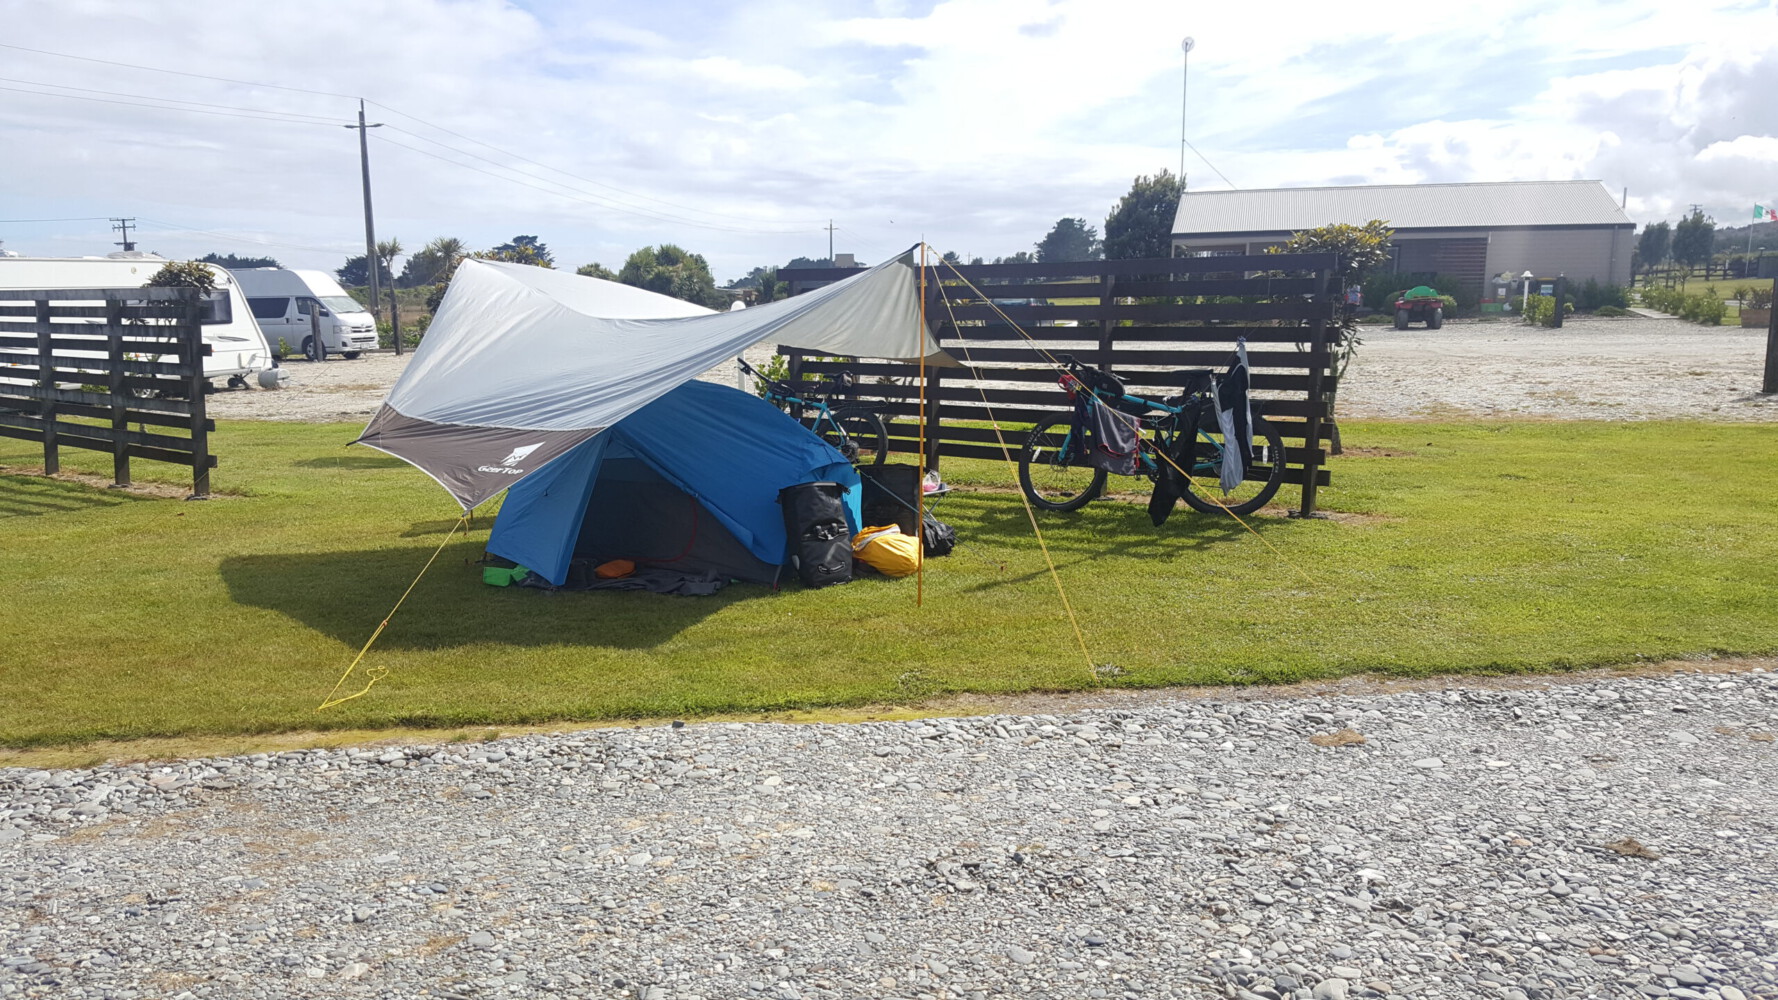 Our tent at the camping ground near Hokitika